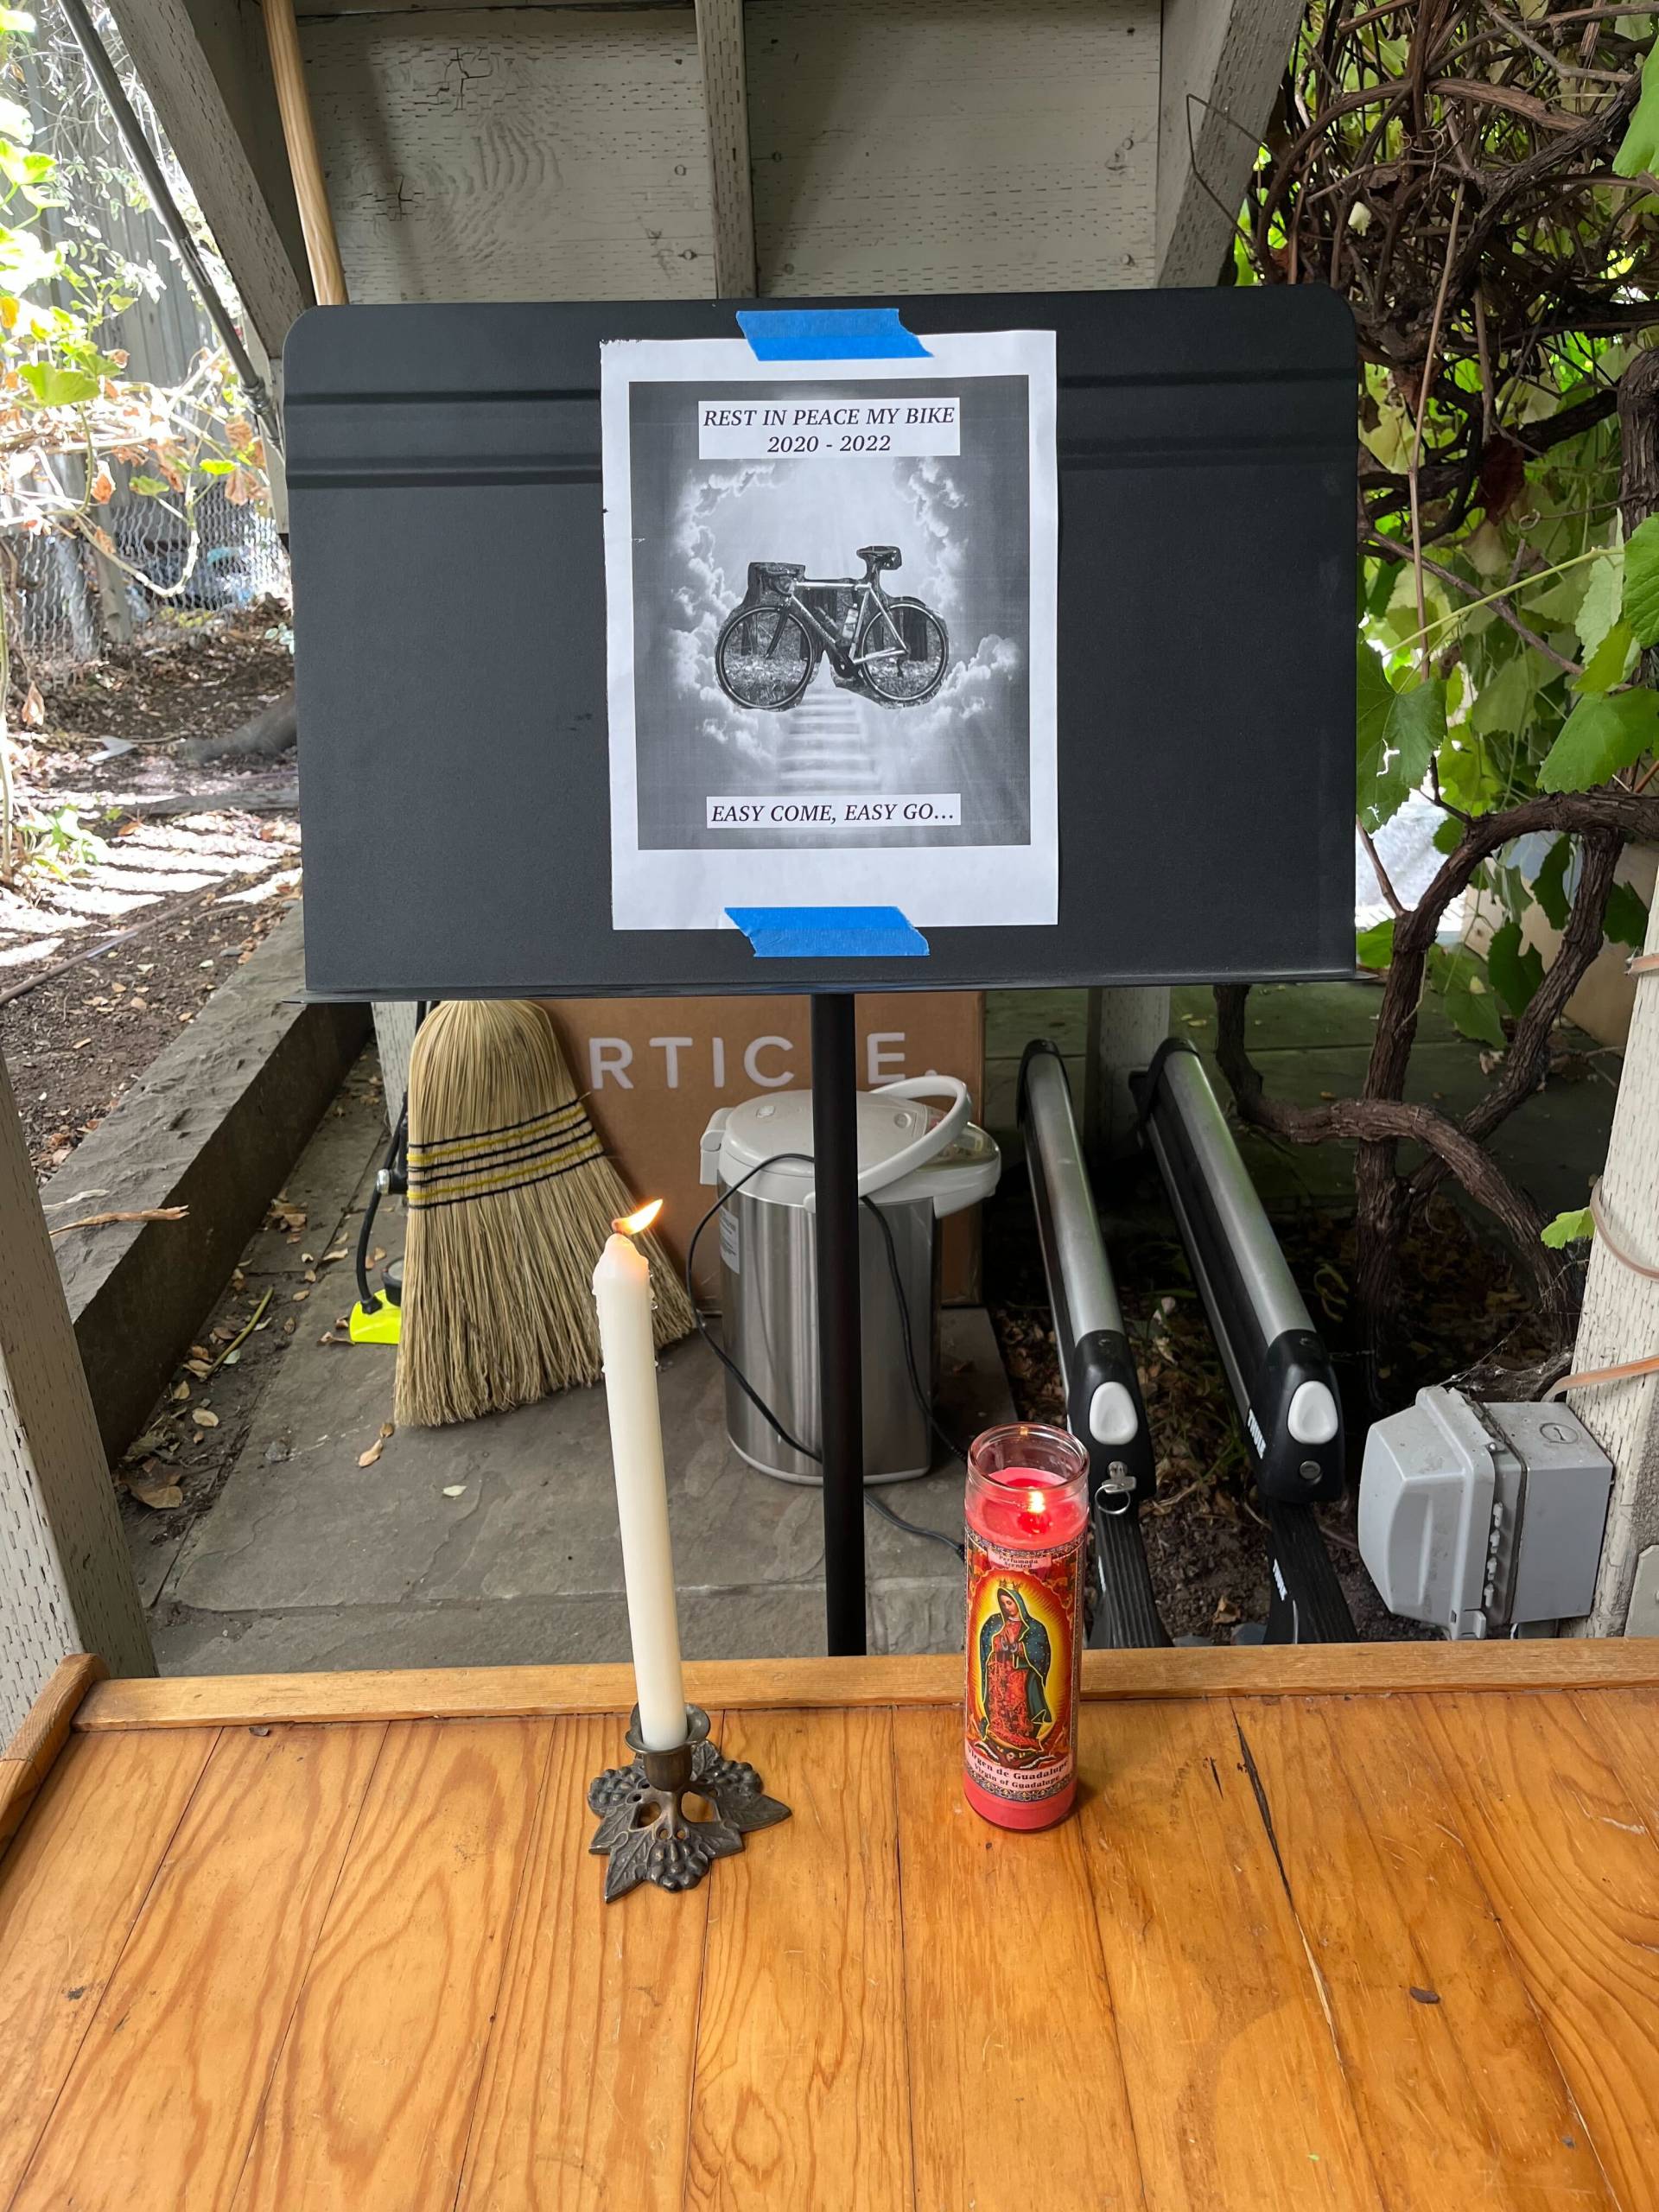 In a backyard, there is a music stand. On the music stand, there is a piece of paper with a photo of a bicycle printed on it. In front of the music stand, there are two candles.